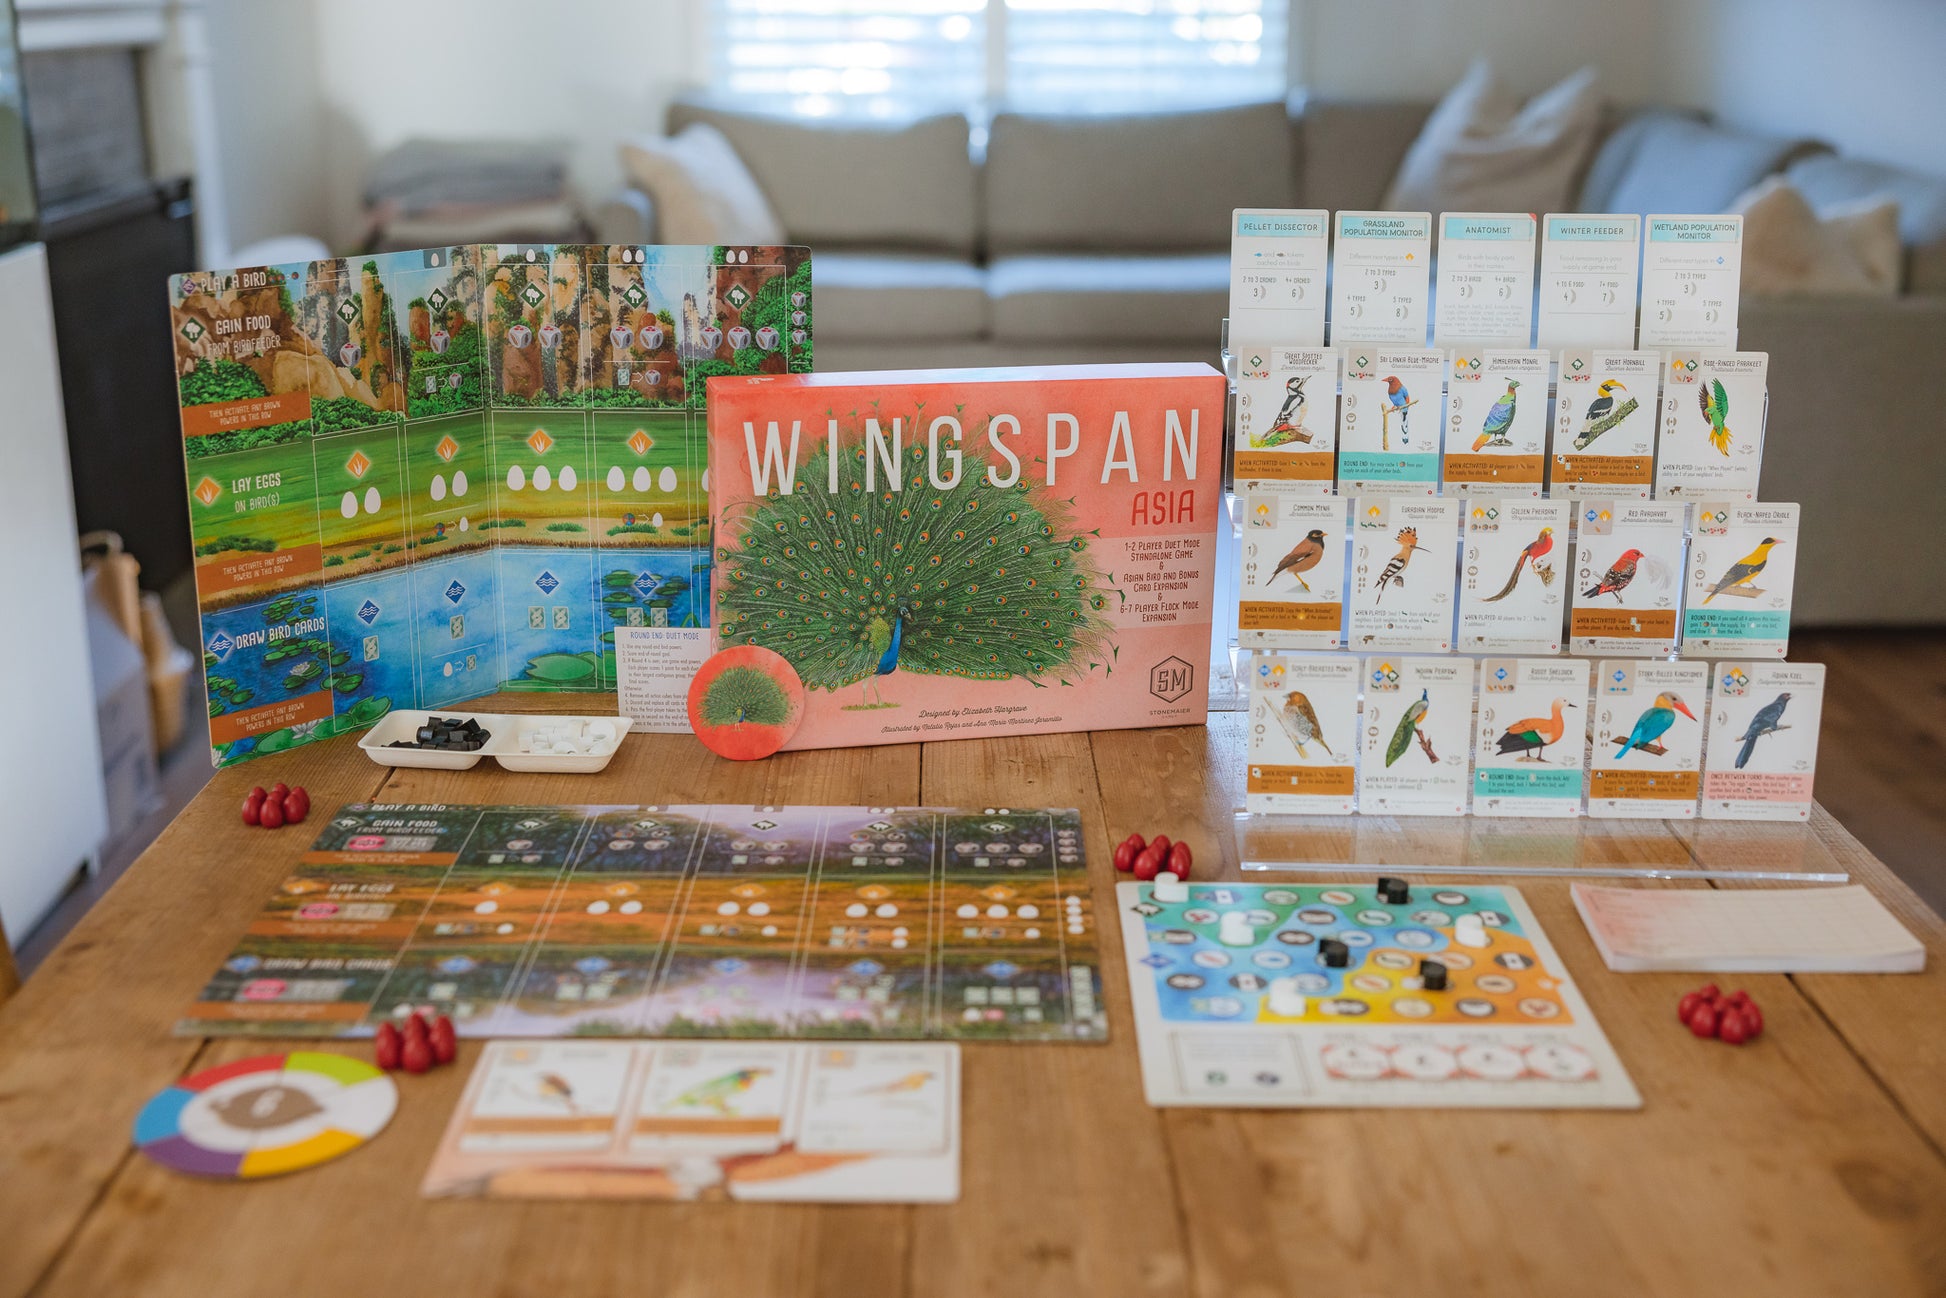 Wingspan Asia Expansion Content